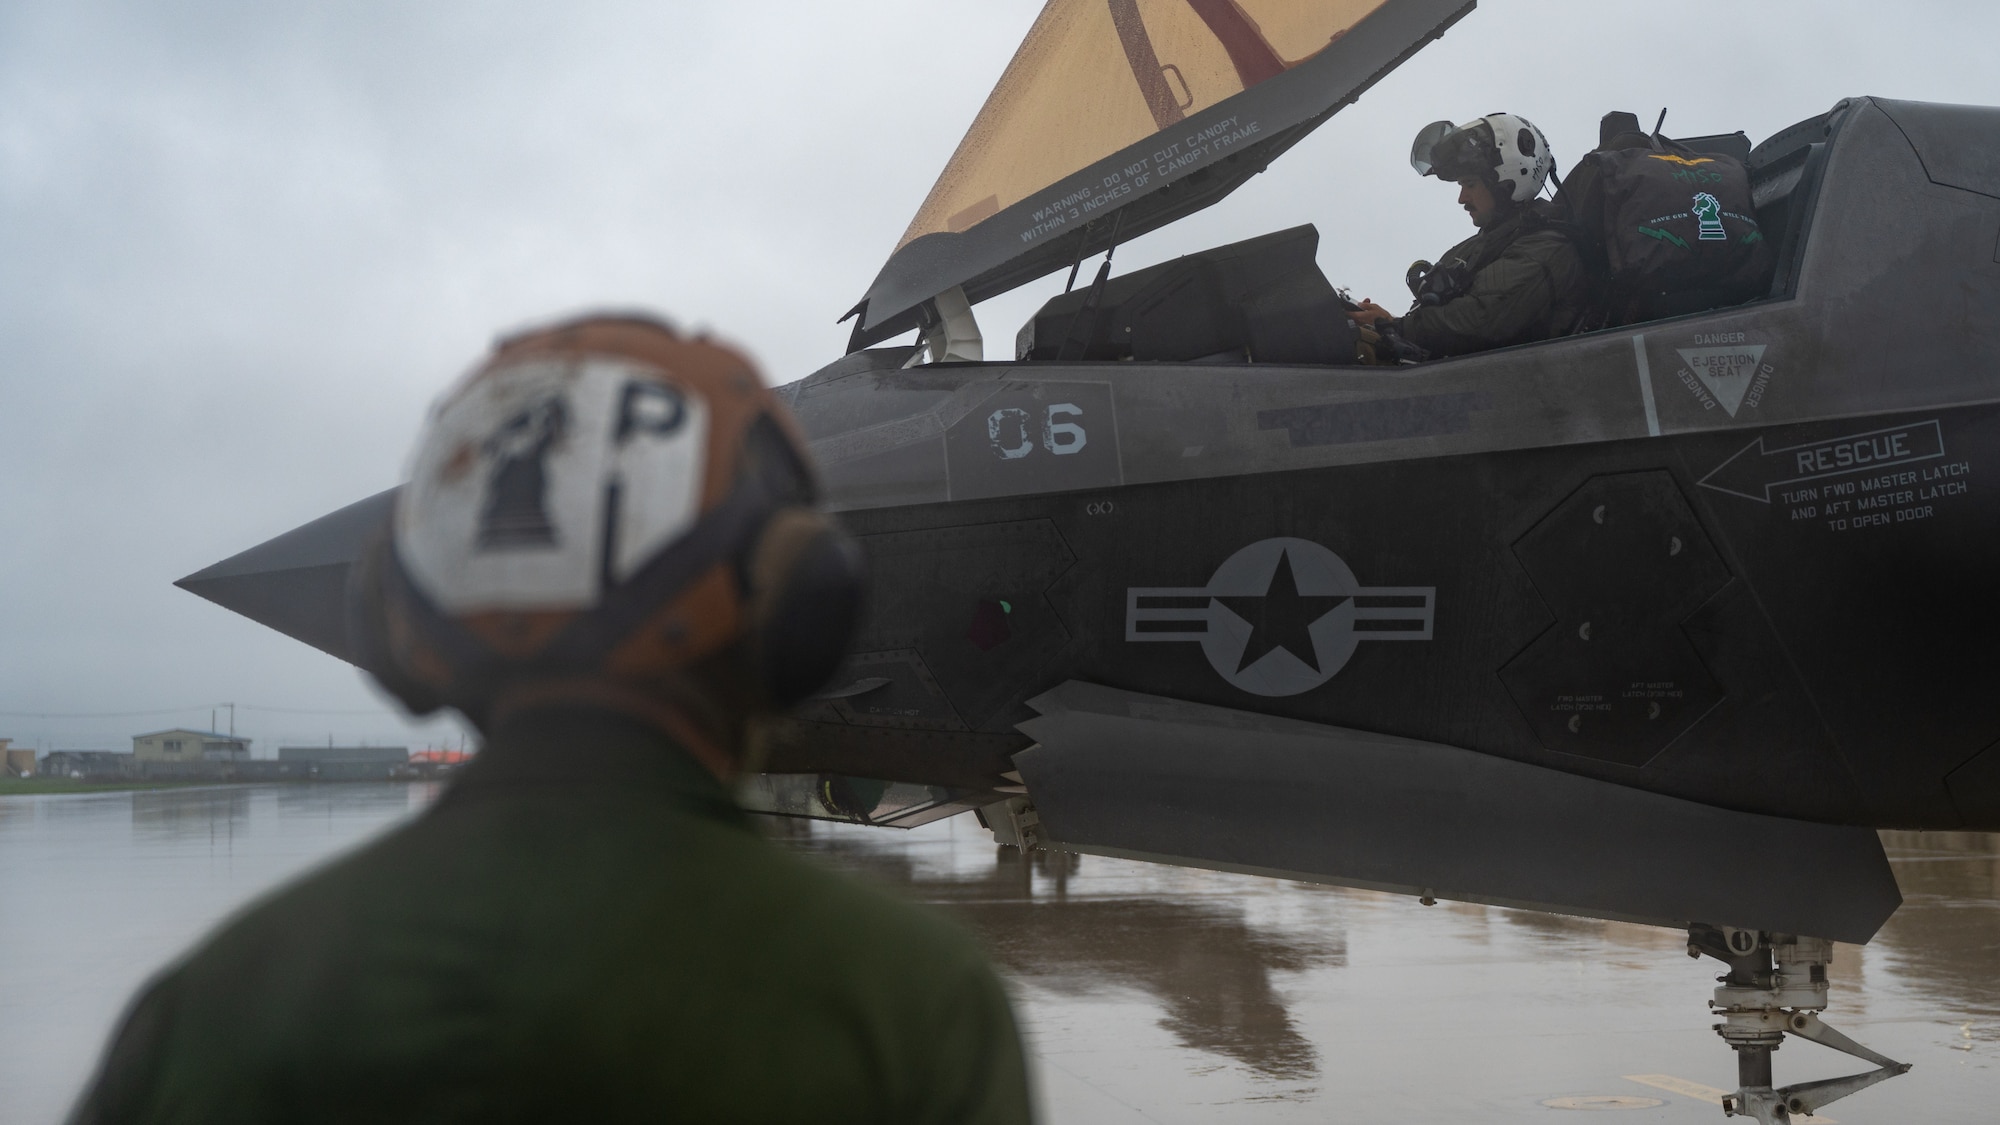 U.S. Marine Corps Cpl. Tanis Pendleton, 121st Marine Fighter Attack Squadron power liner mechanic, stands by while U.S. Marine Corps Capt. Cameron Caldwell,  F-35 Lightning II pilot, completes final preparation before taking off